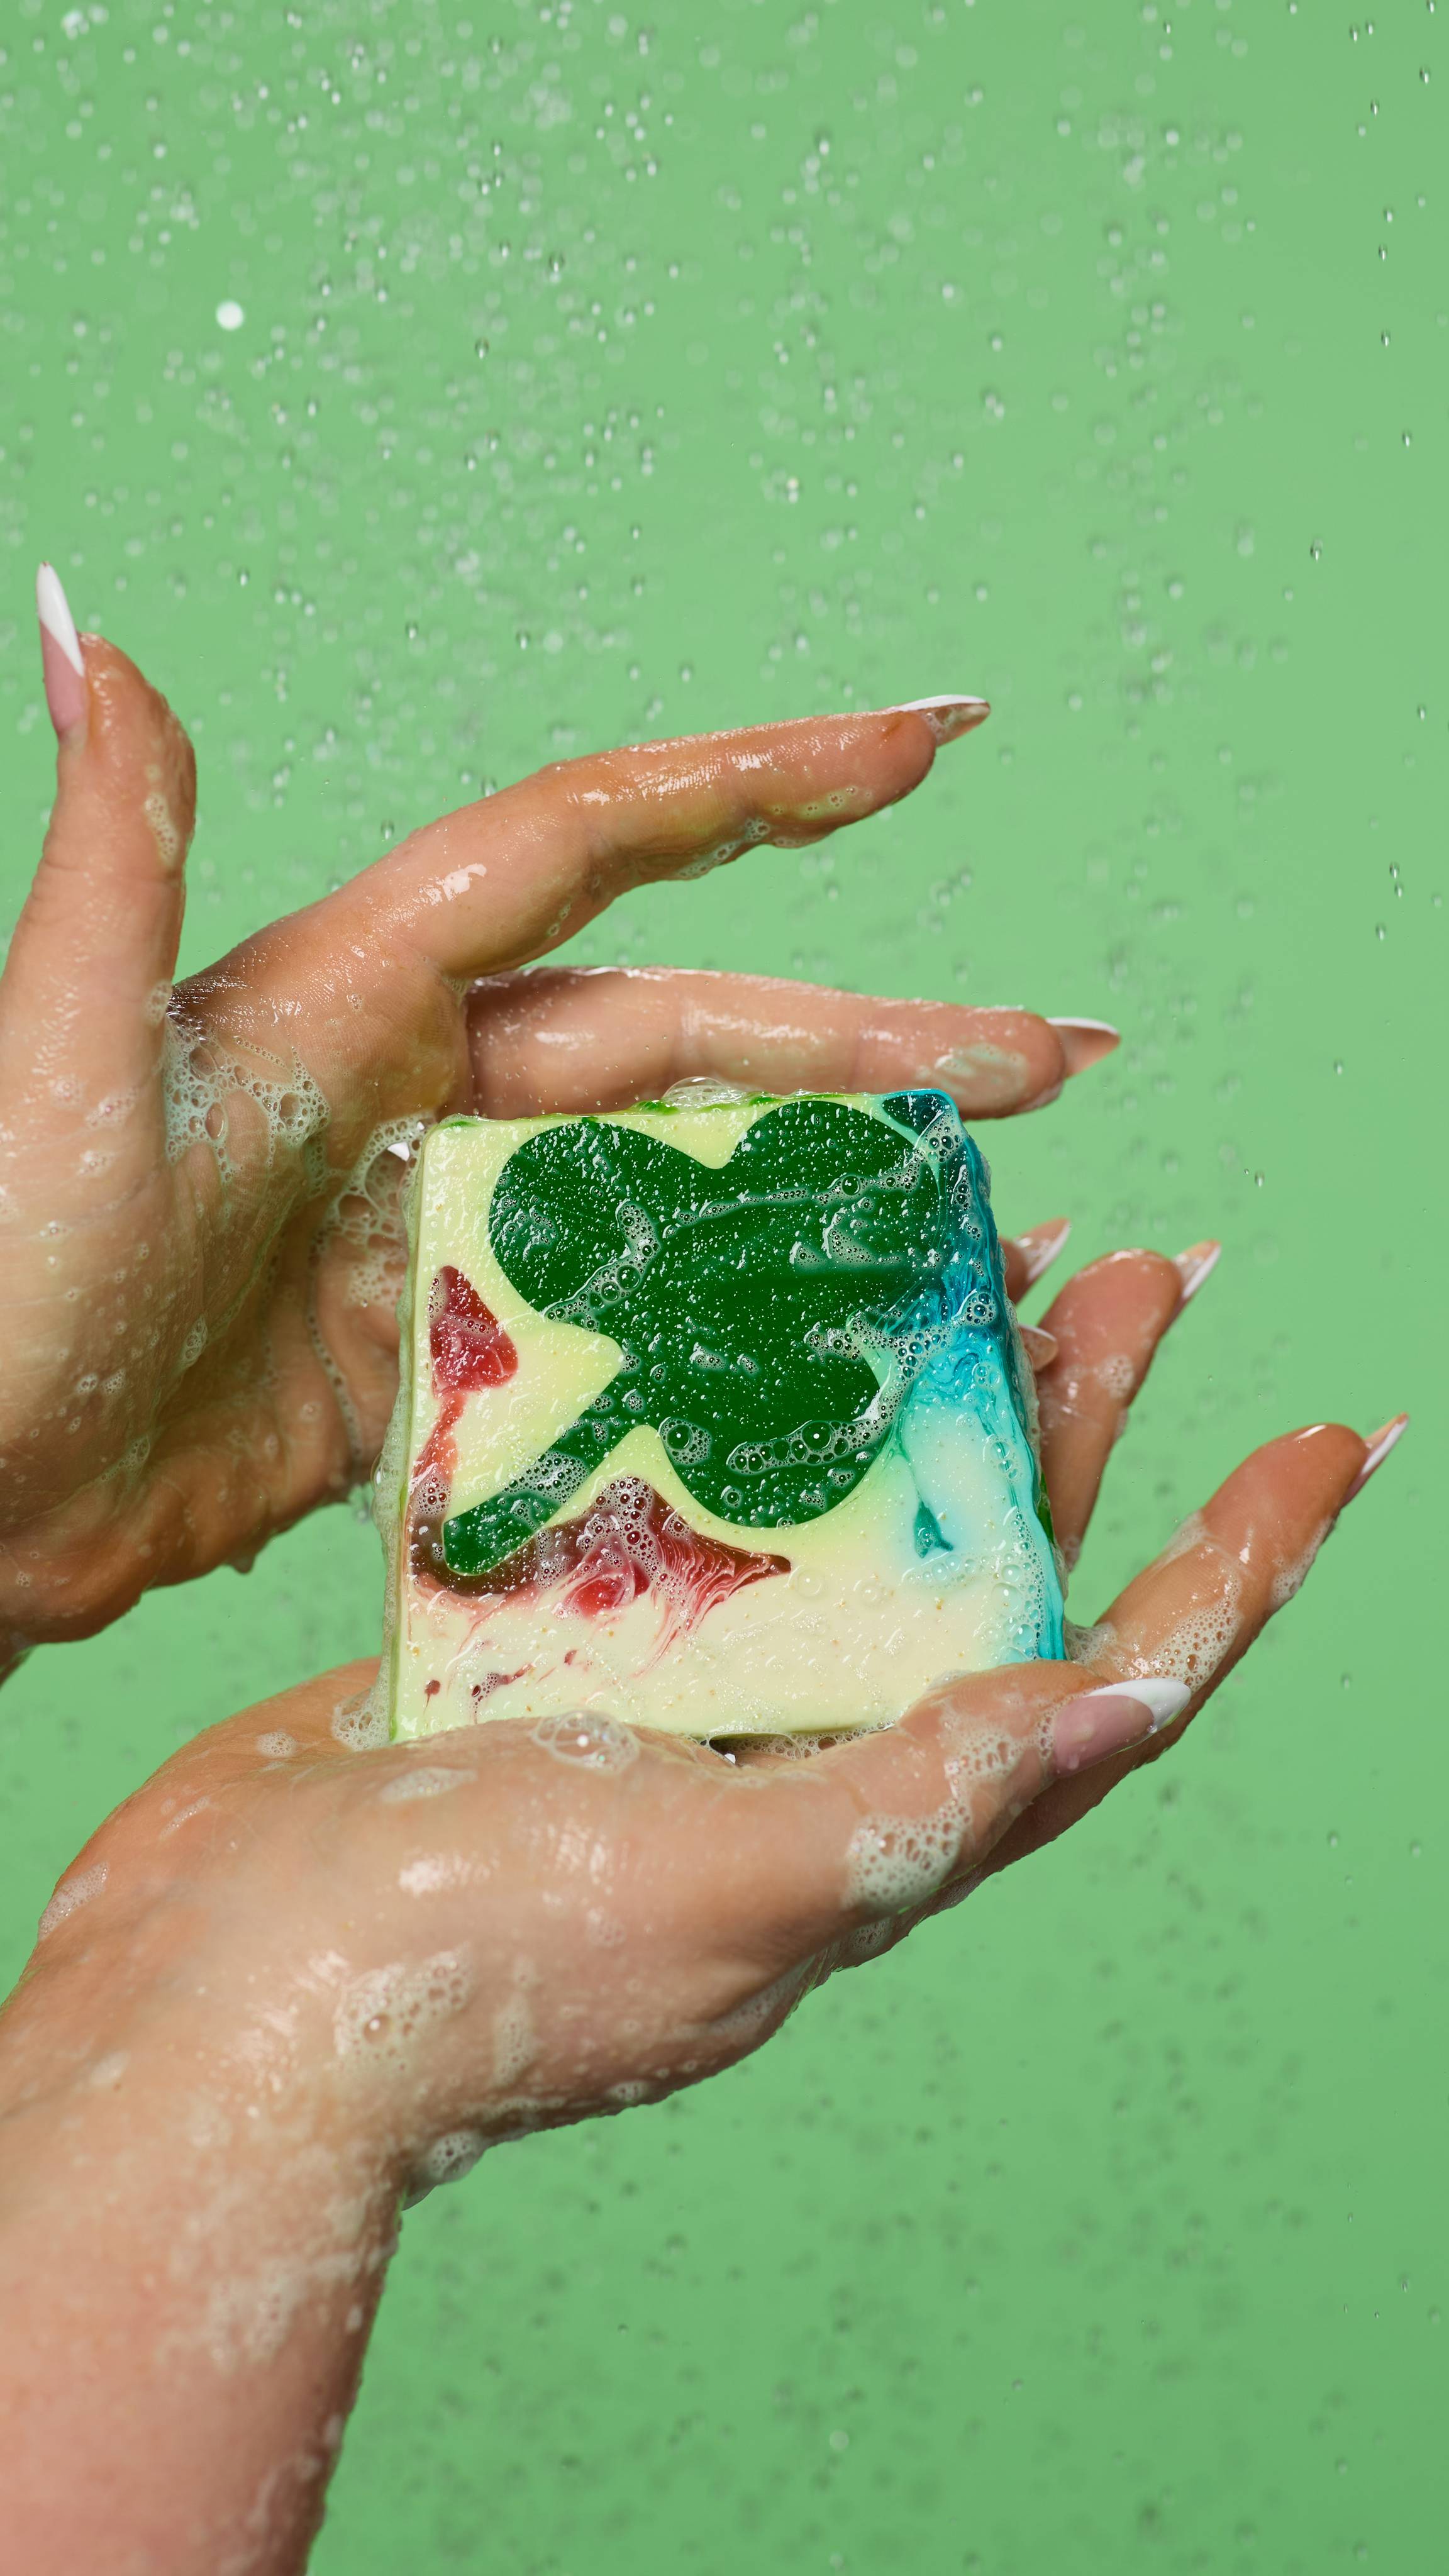 A close-up of the model's hands, lathered up with soapy suds while holding the Alban Eilir soap. Water is falling from above and there is a light green background.